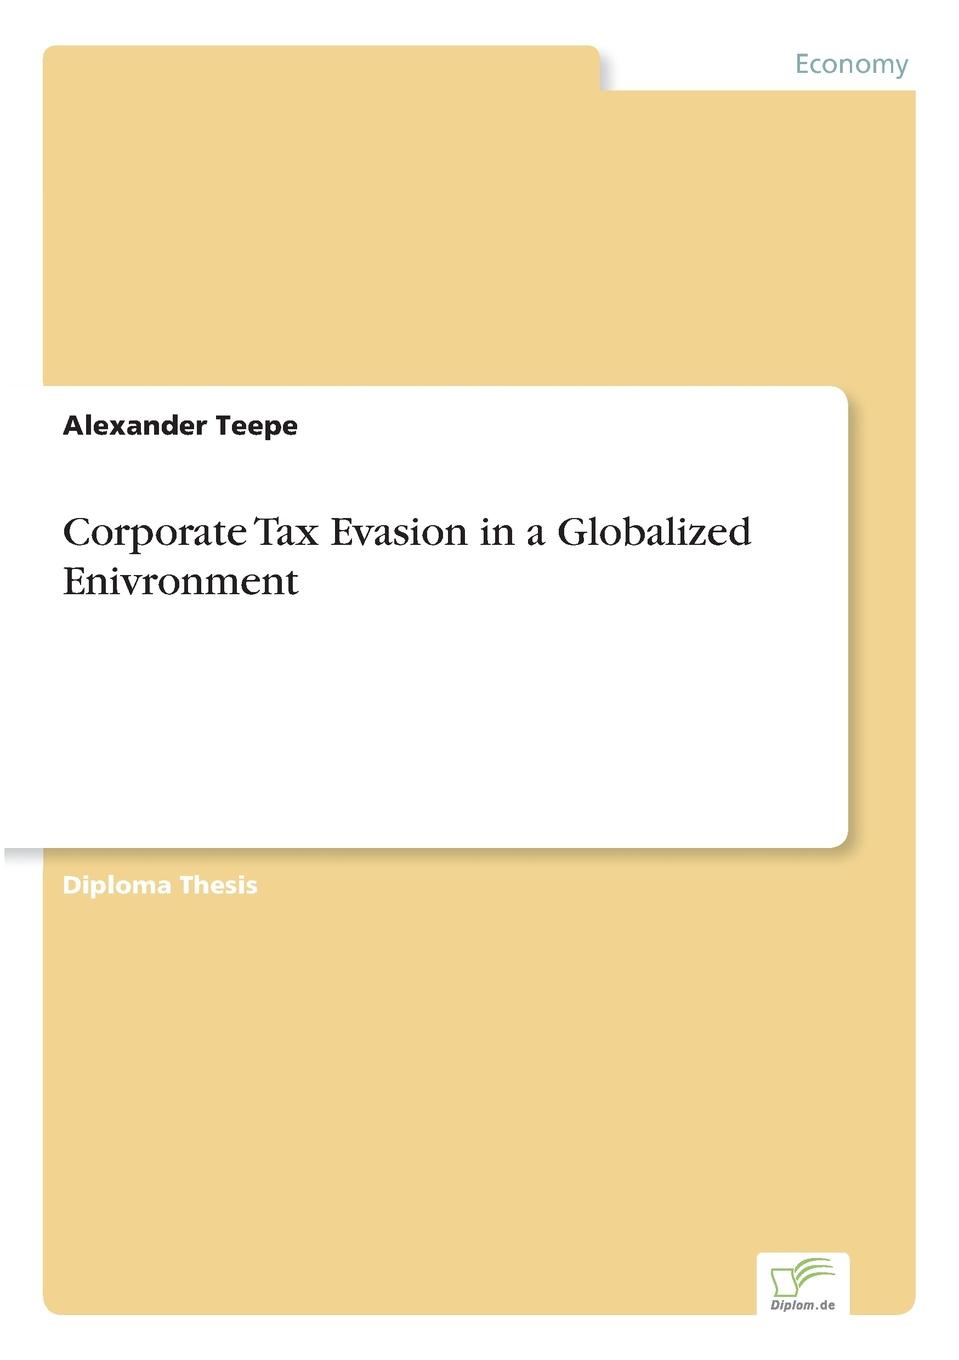 Alexander Teepe Corporate Tax Evasion in a Globalized Enivronment